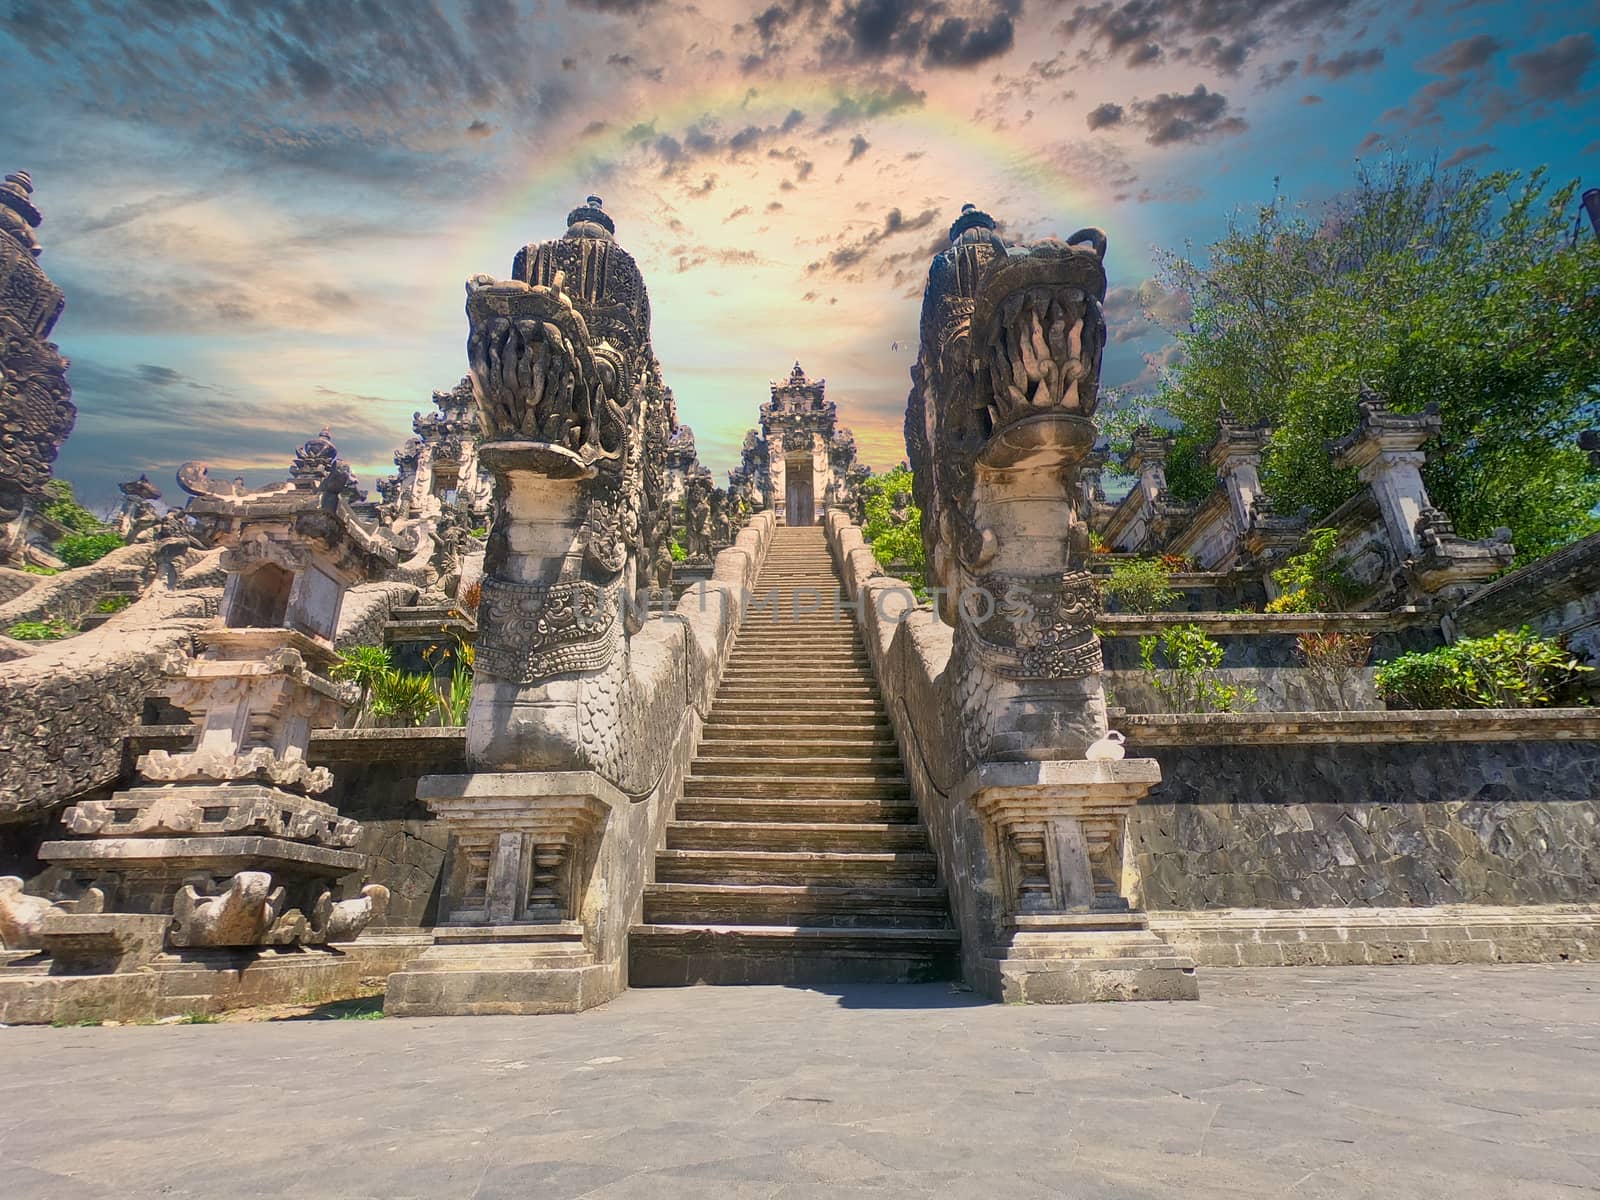 Rainbow at Gate of Haven is one of the popular destination in Bali indonesia.